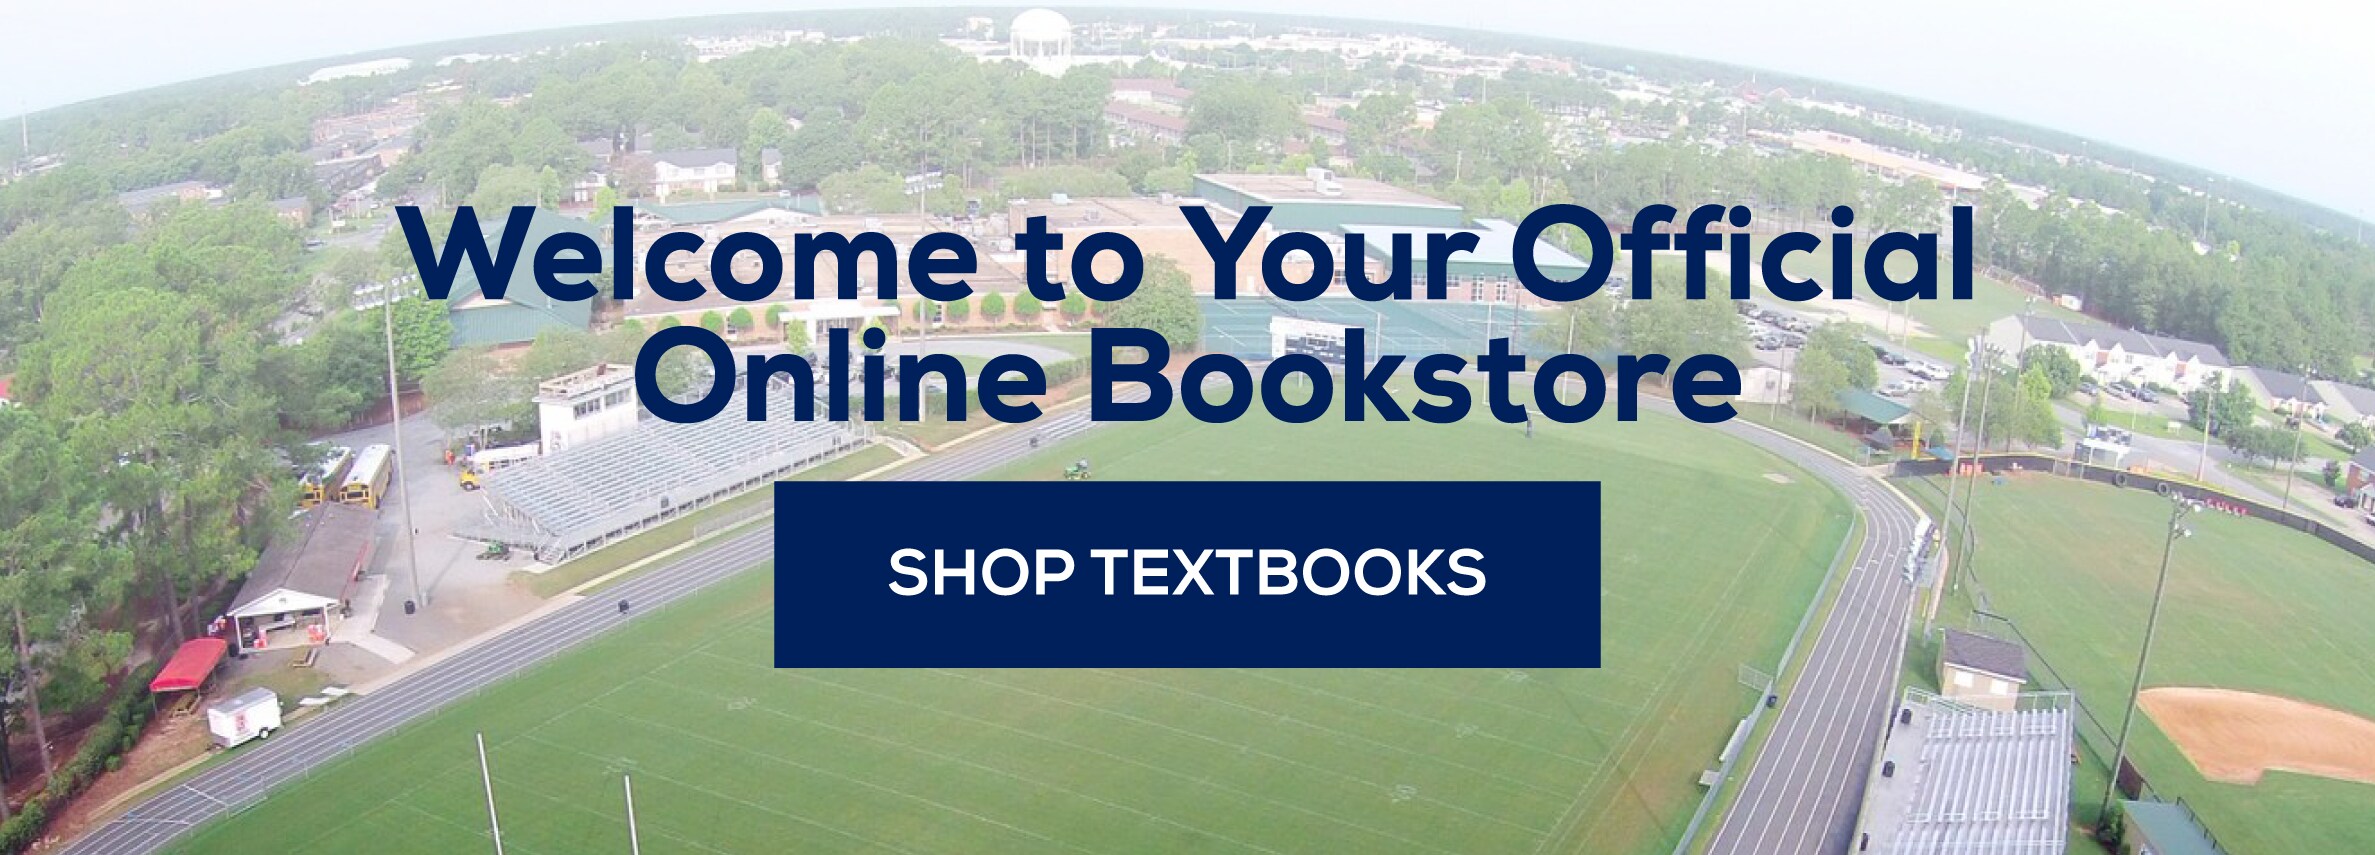 Welcome to your official online bookstore. shop textbooks